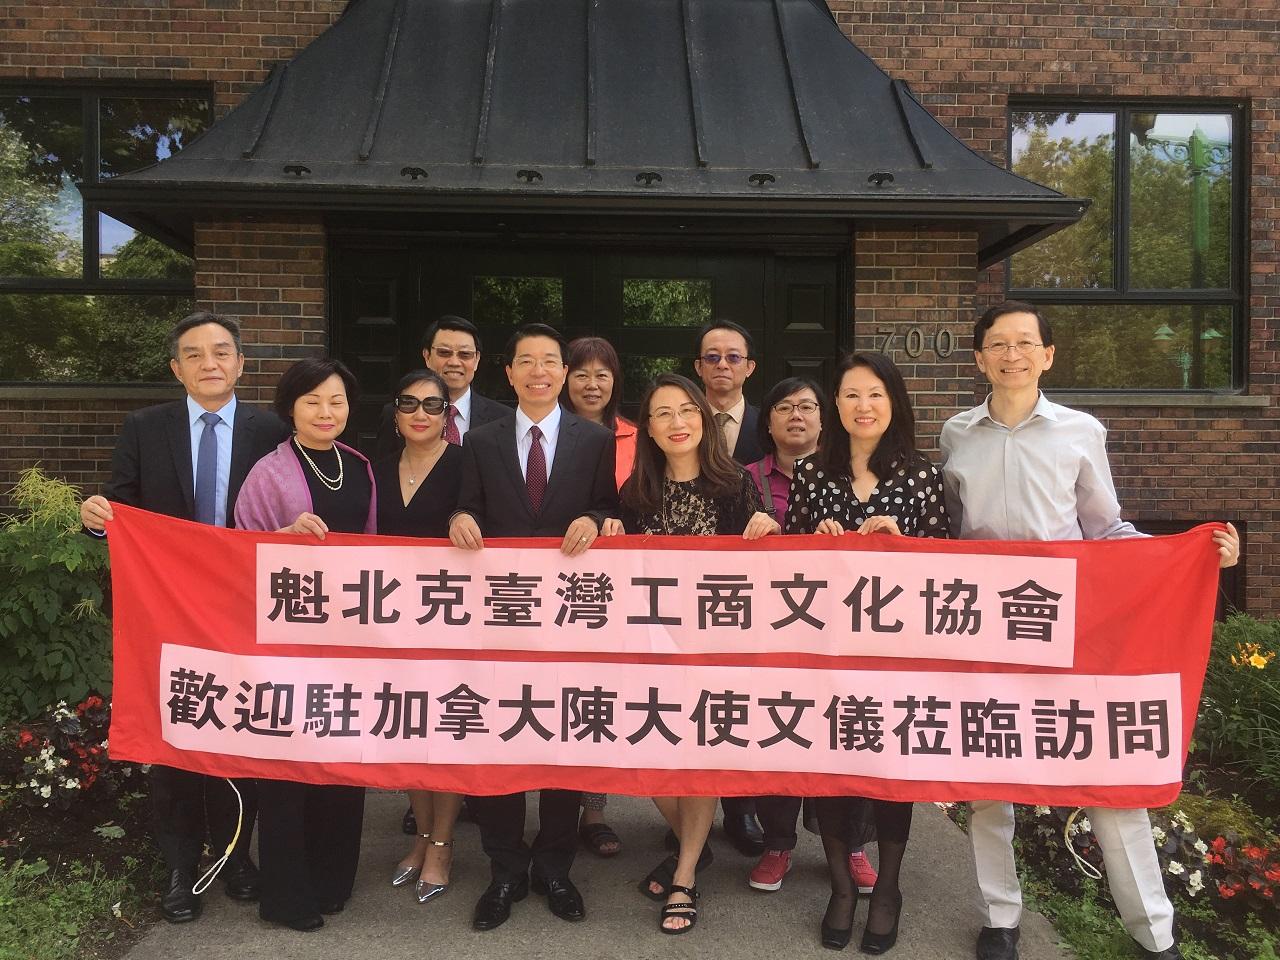 Representative Winston Wen-yi Chen of the Taipei Economic and Cultural Office in Canada (TECO) was warmly welcomed by the overseas Chinese and Taiwanese communities in Montreal on July 8, 2018   3/5